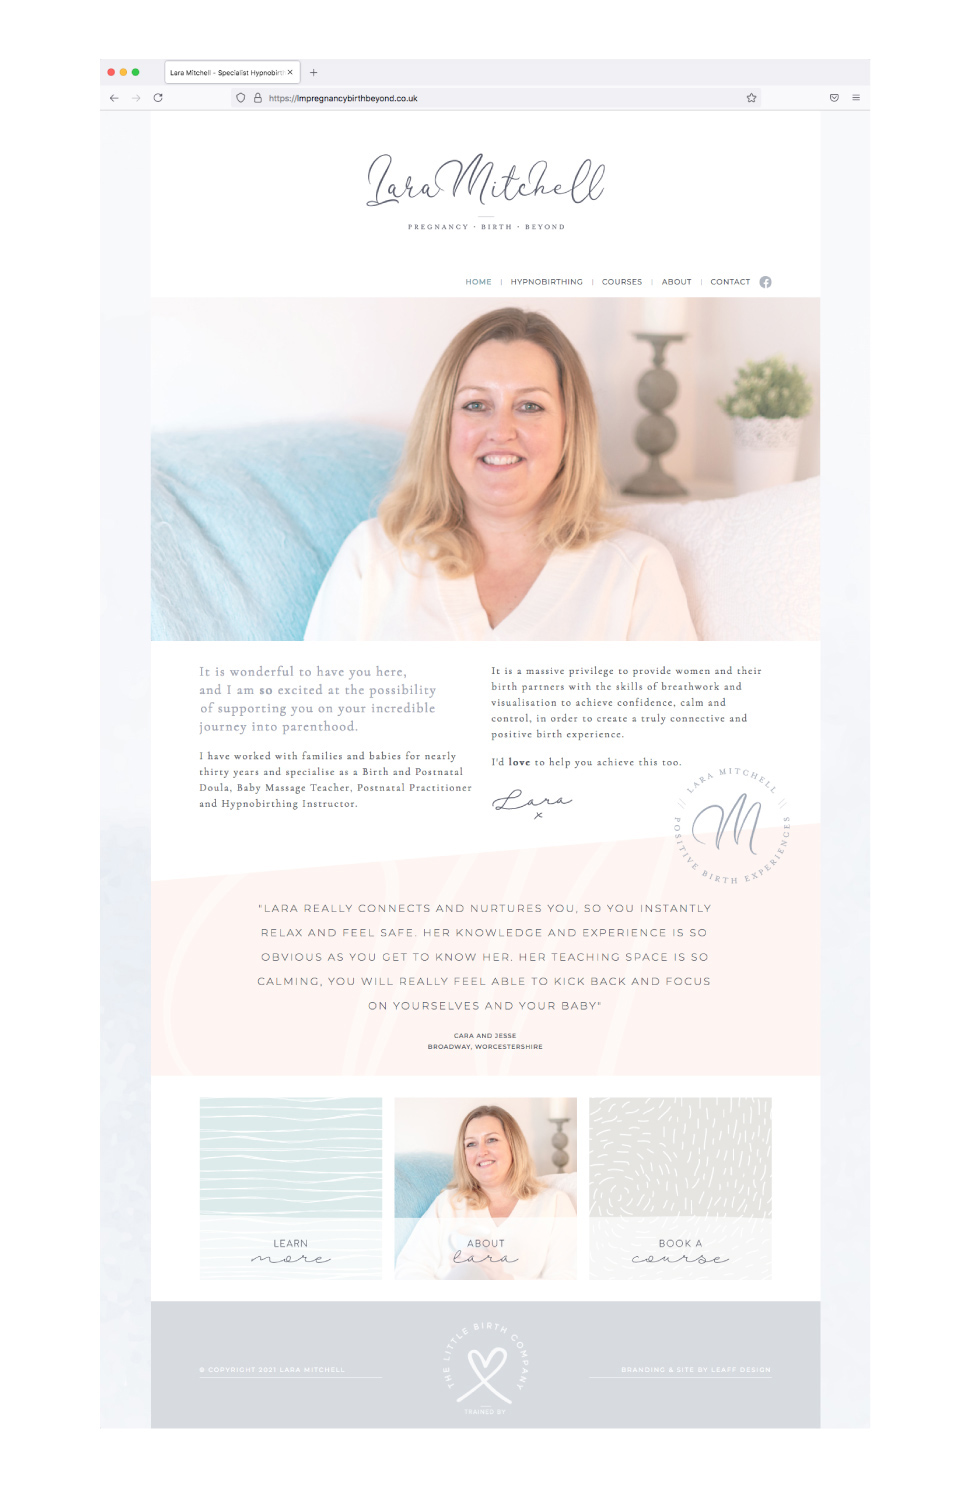 The website homepage designed and built for Lara Mitchell.